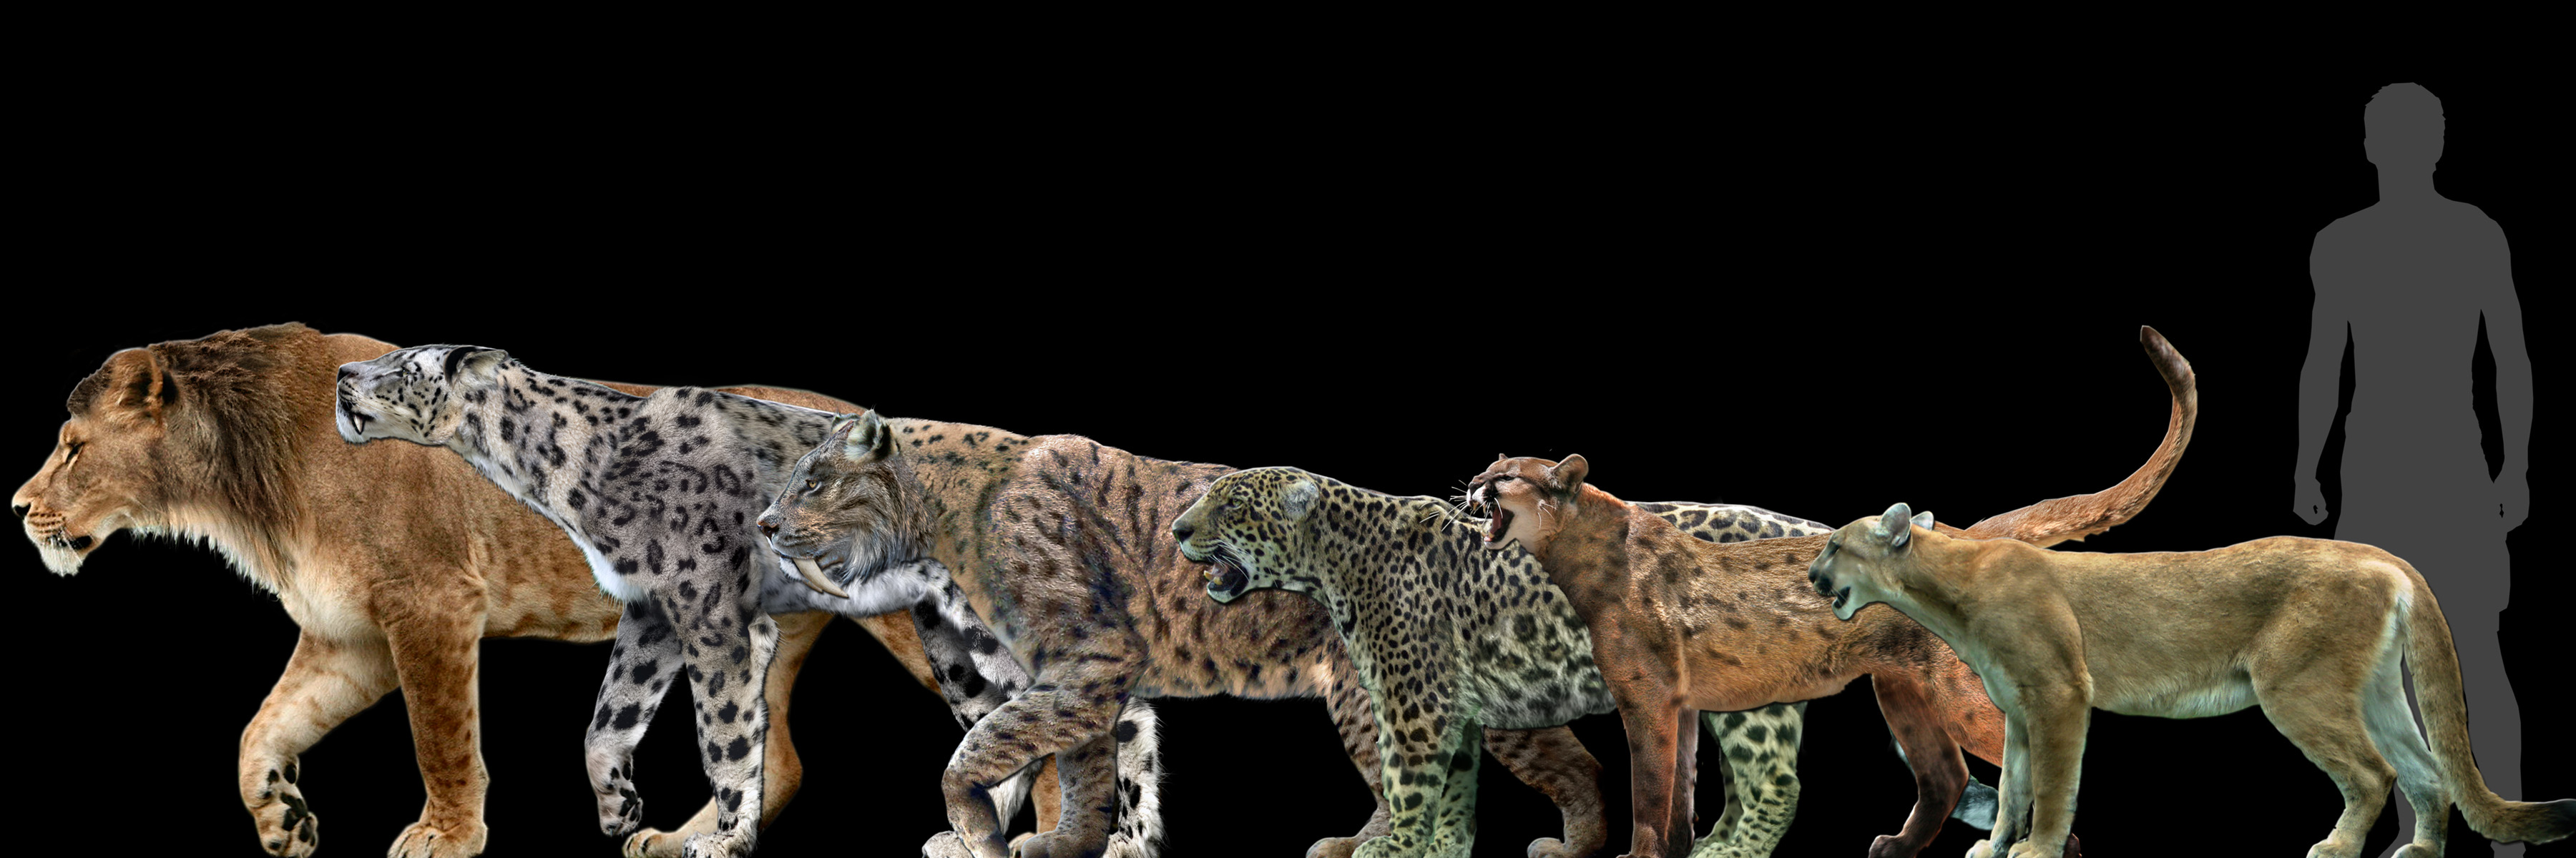 big_cats____into_big_poster__by_danthema